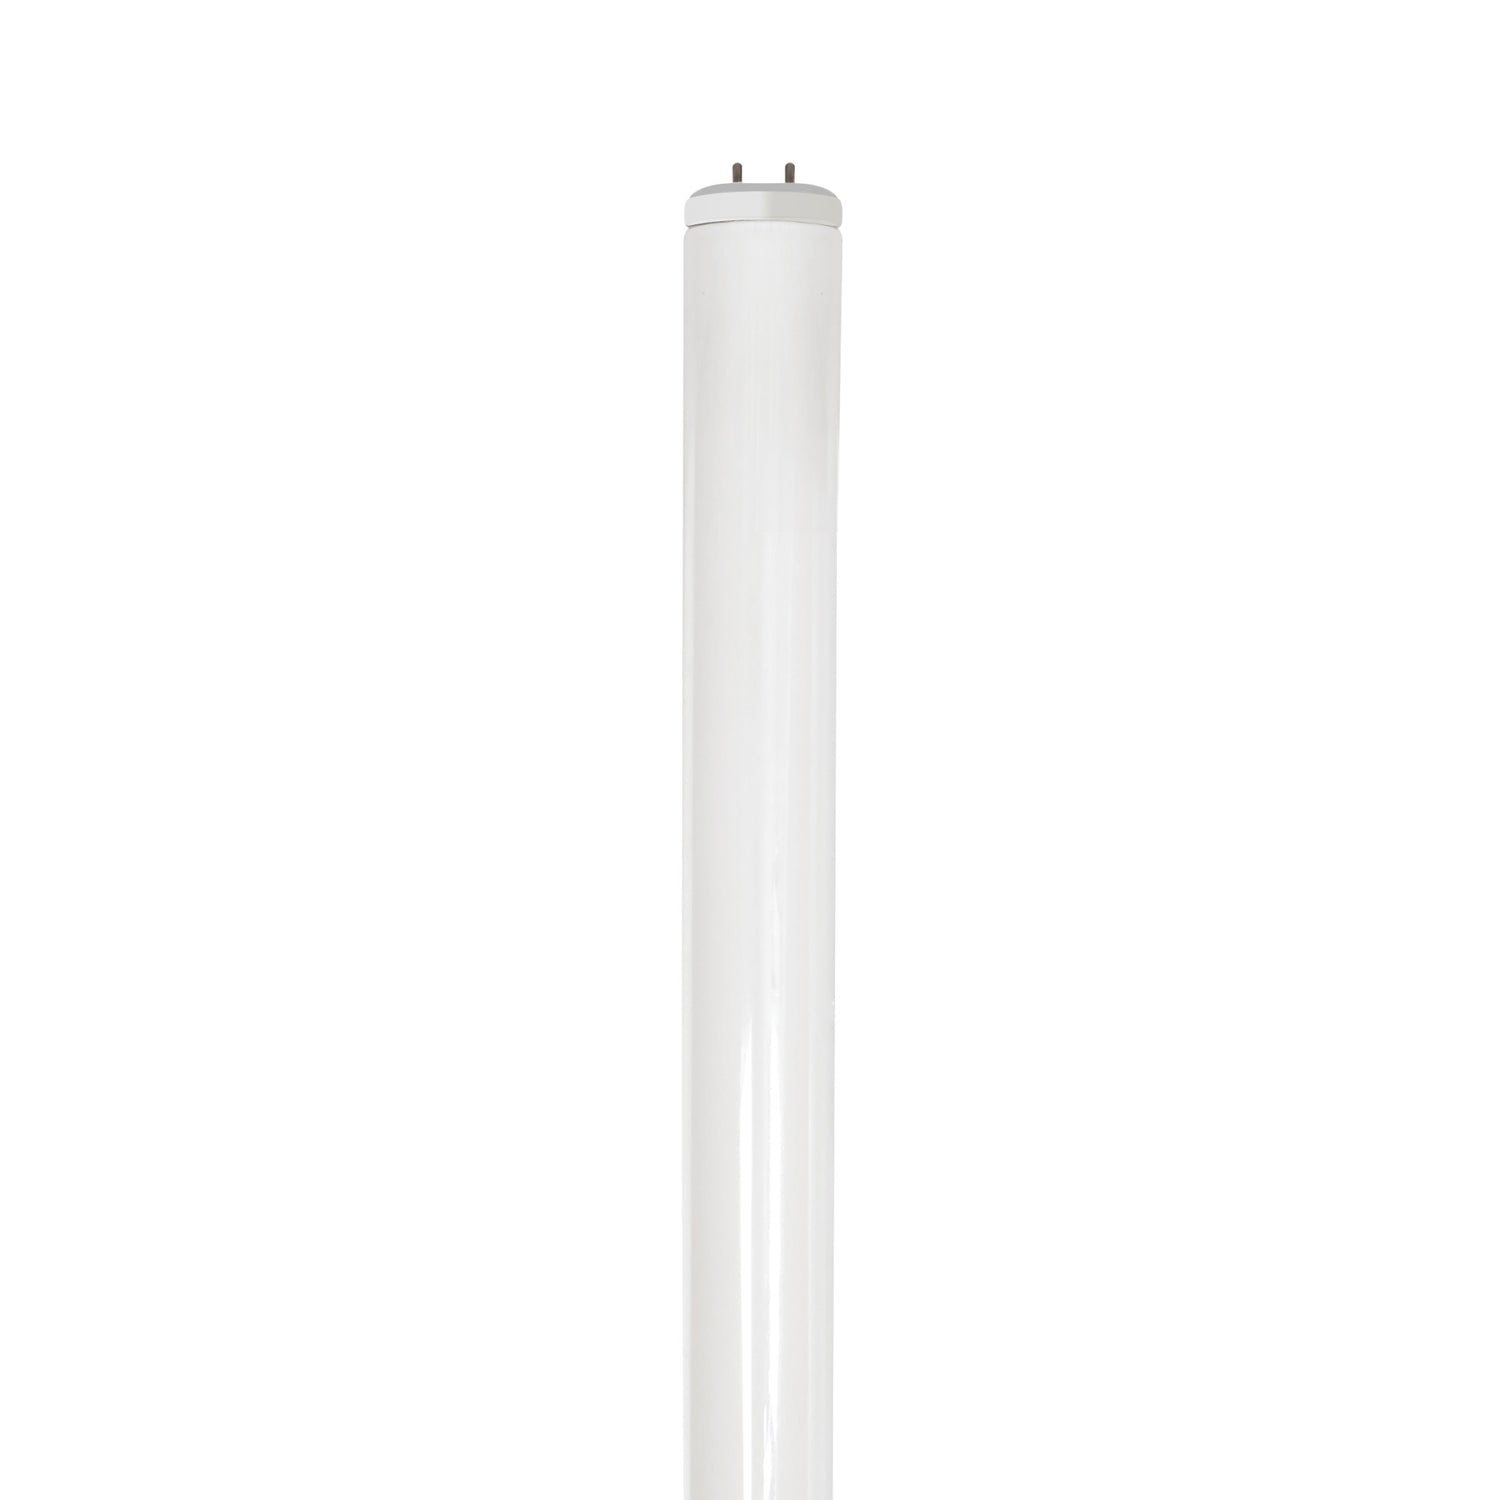 4 ft. 32W Cool White (4100K) T8 G13 Base High Output Fluorescent Linear Tube (2-Pack)